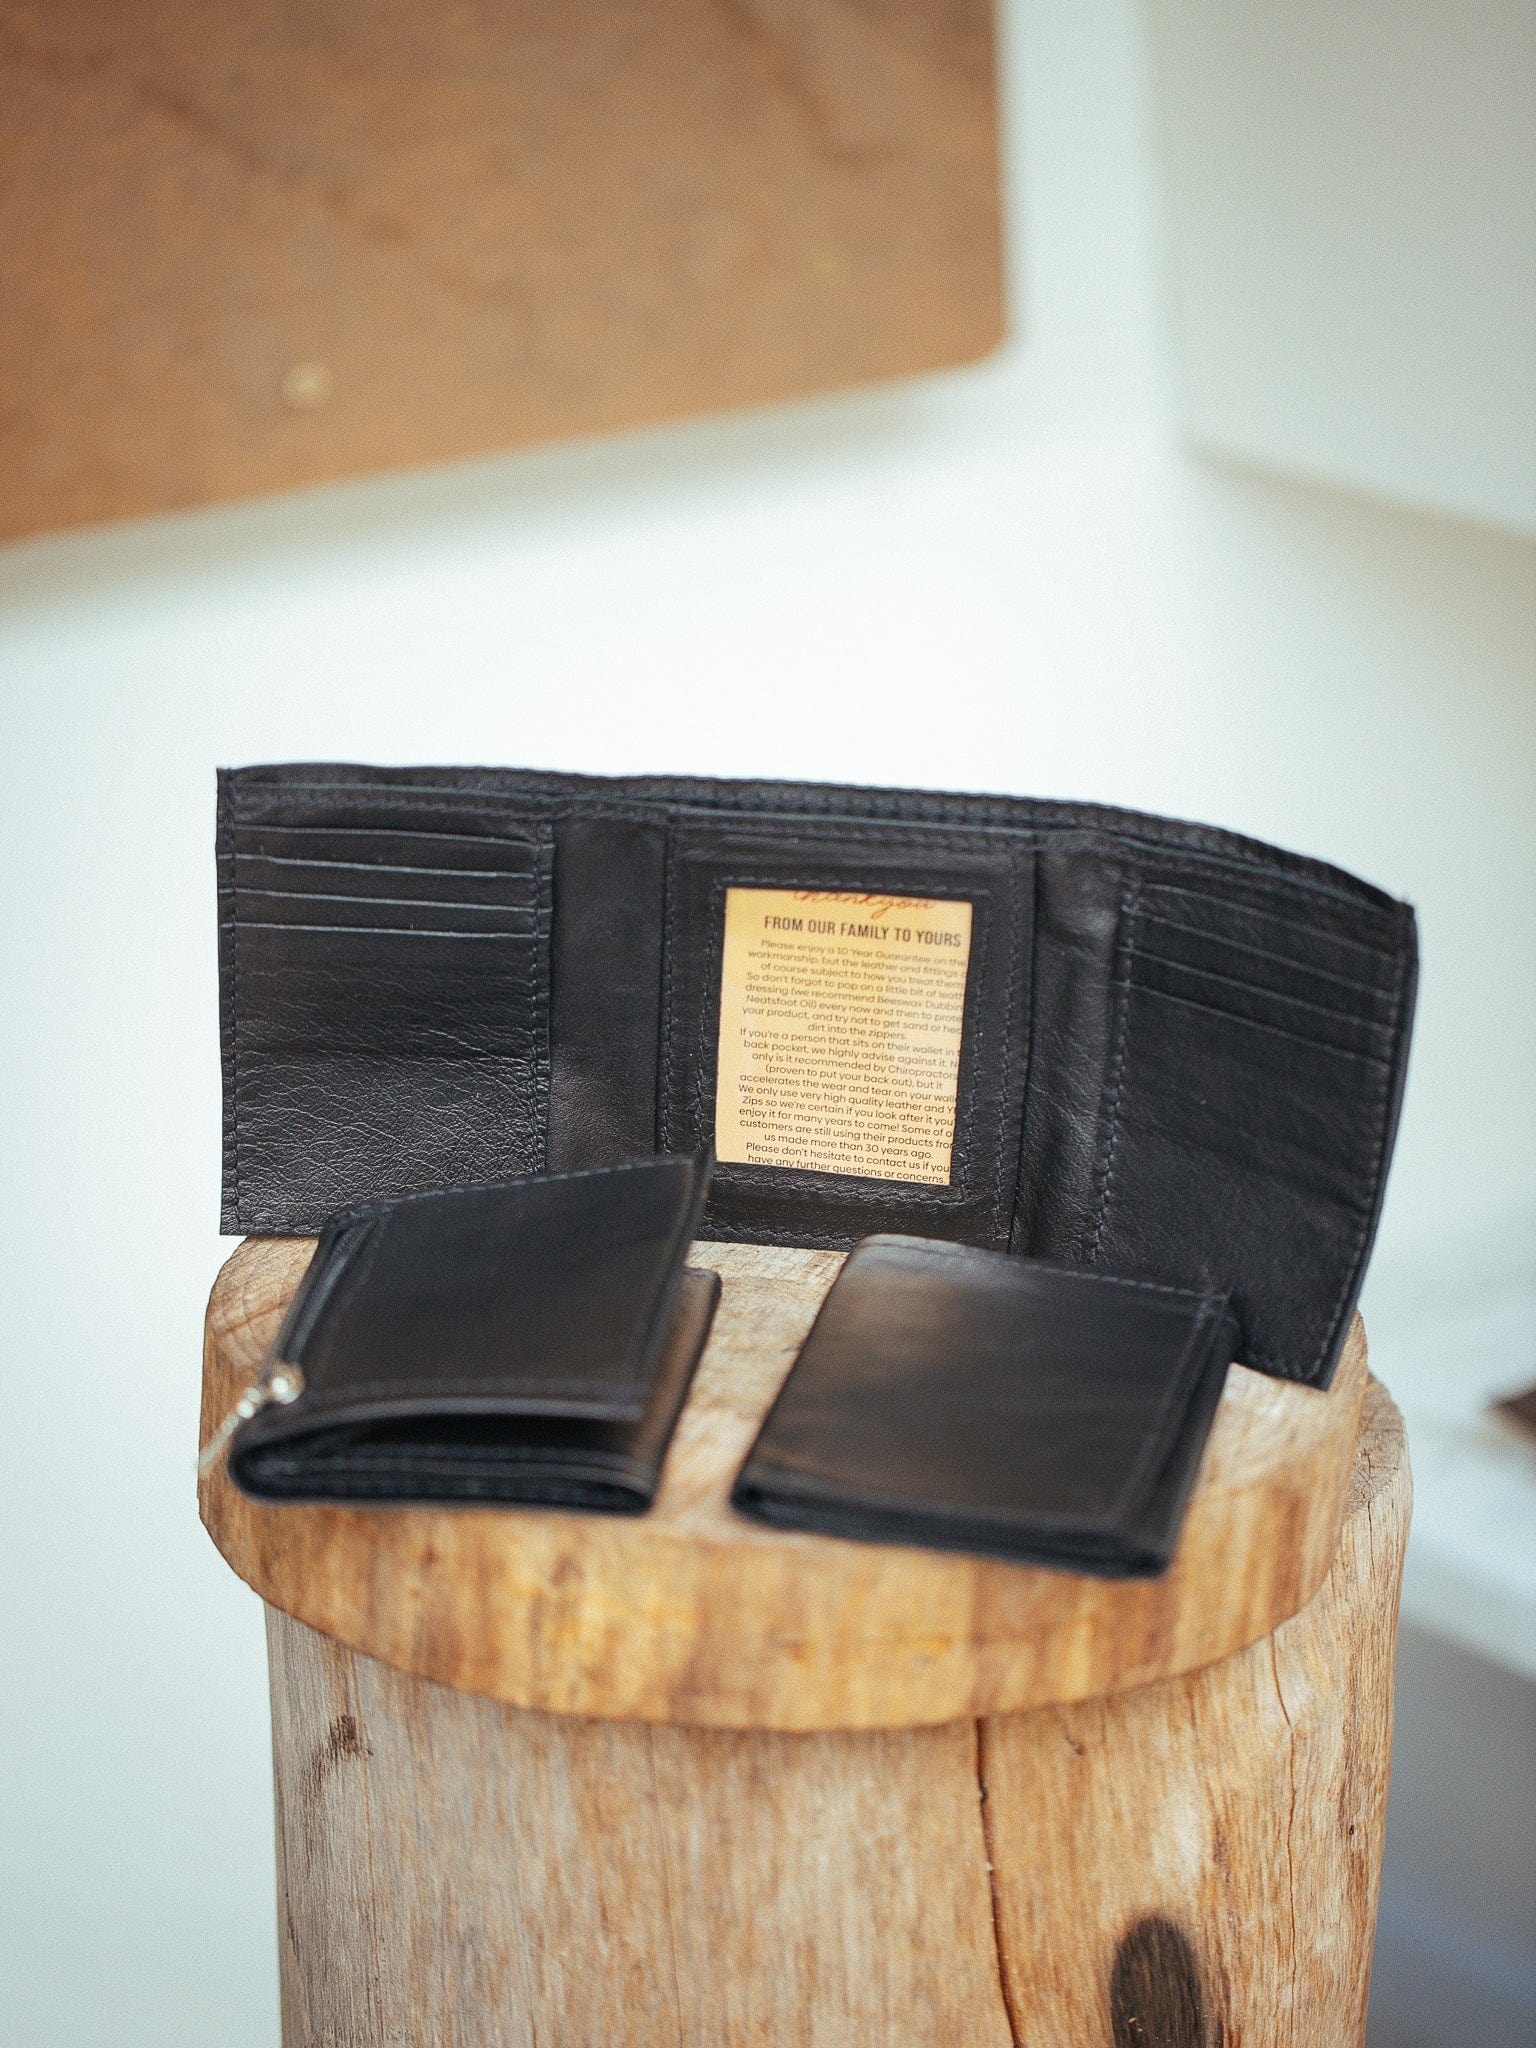 The Real McCaul Wallets Black / With Coin Zip Deluxe Trifold Wallet - Kangaroo Australian Made Australian Owned Tri-Fold Men's Wallet - MADE IN AUSTRALIA - Kangaroo & Cowhide Nappa